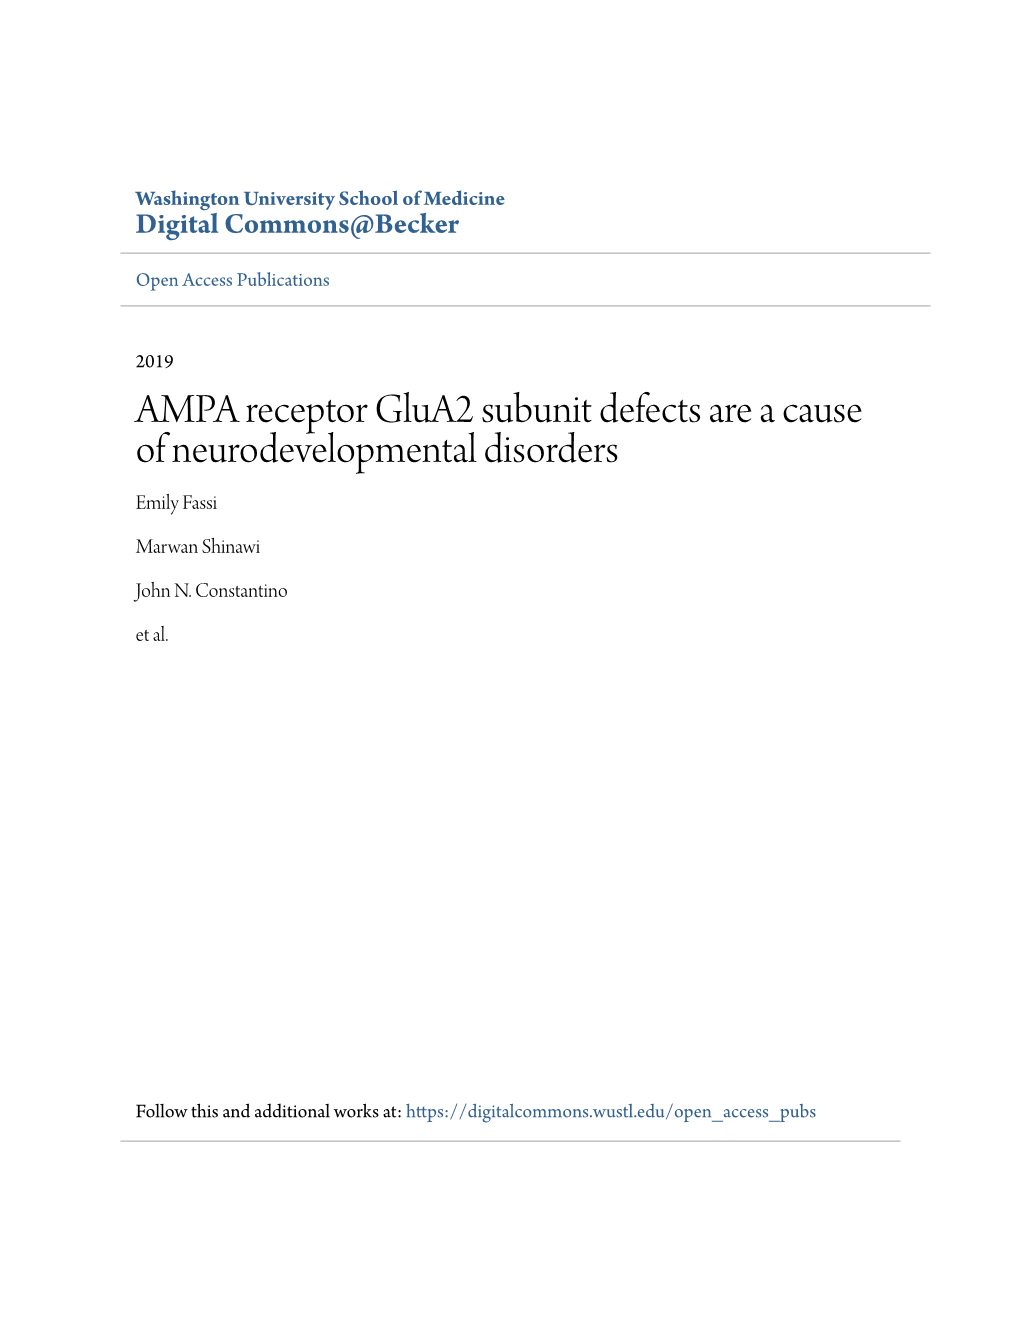 AMPA Receptor Glua2 Subunit Defects Are a Cause of Neurodevelopmental Disorders Emily Fassi